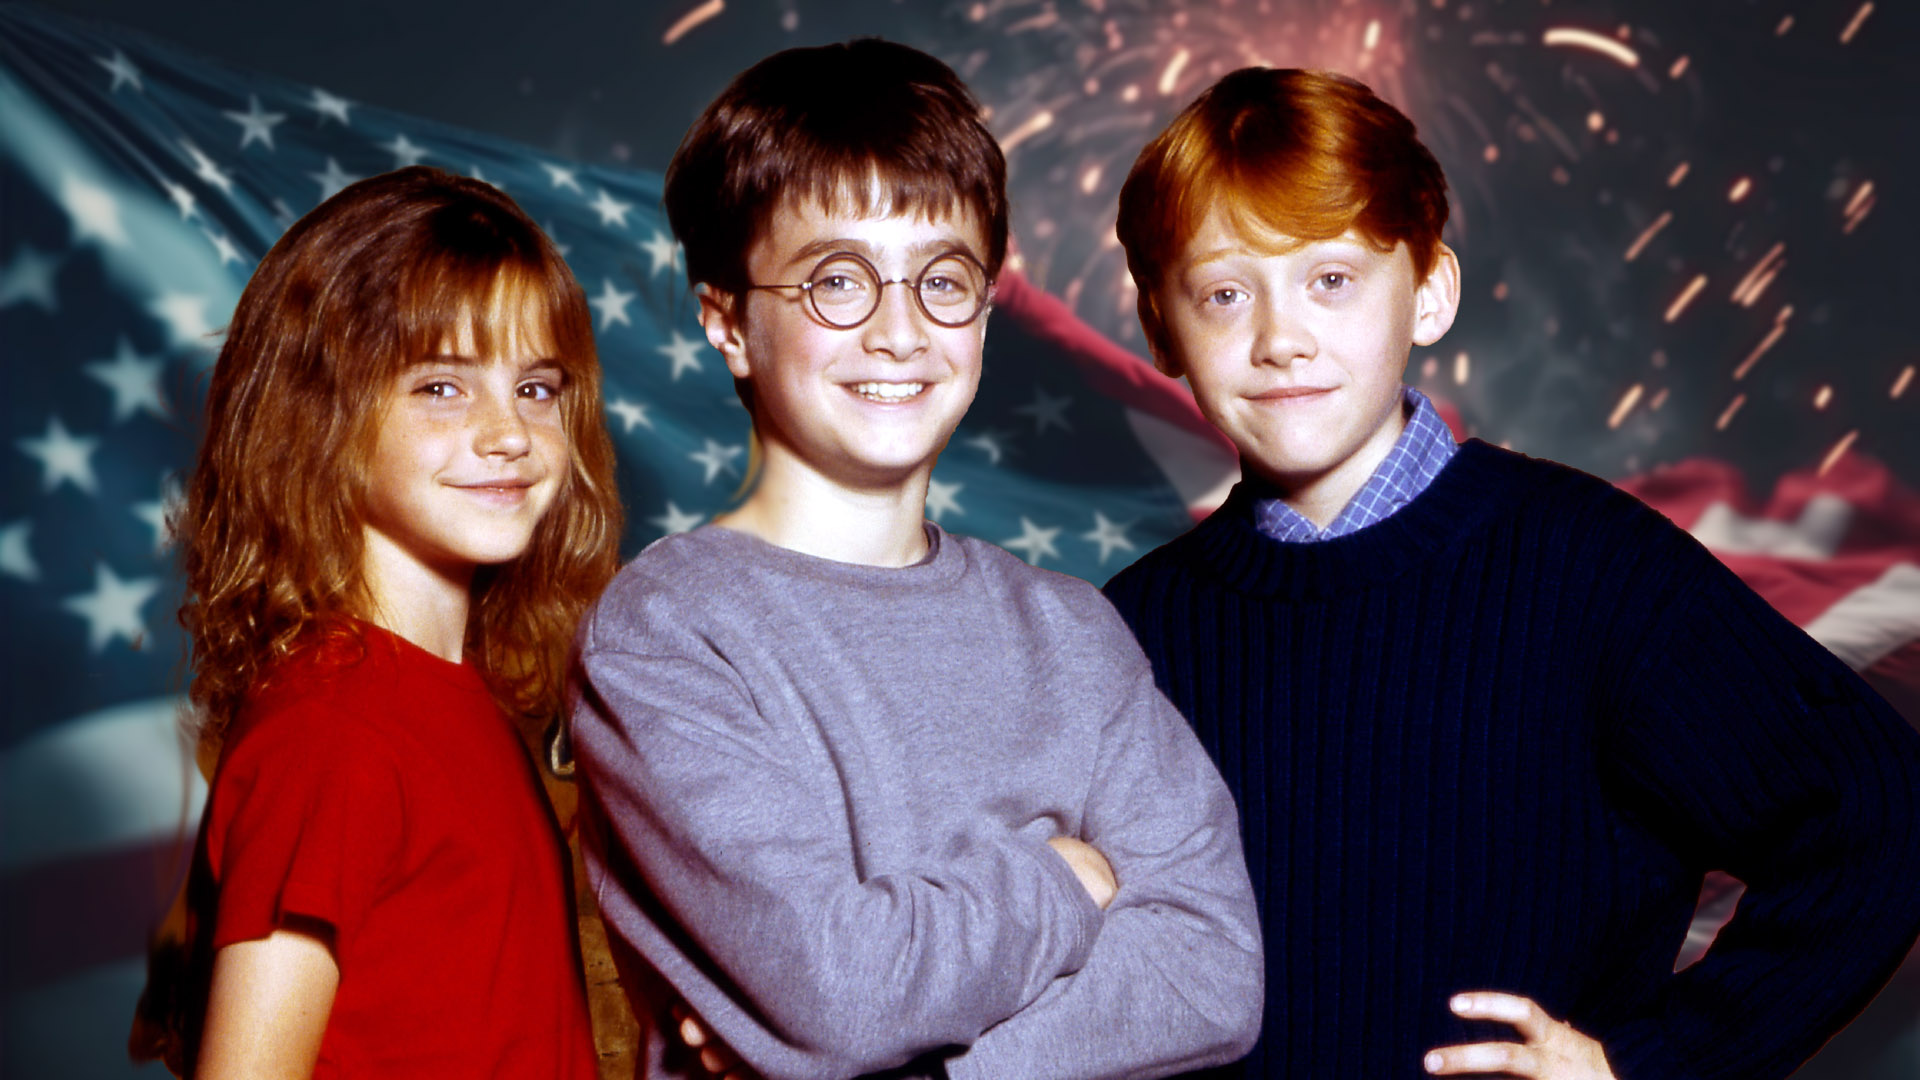 All-American Cast Is the Best Thing That Could Happened to Harry Potter